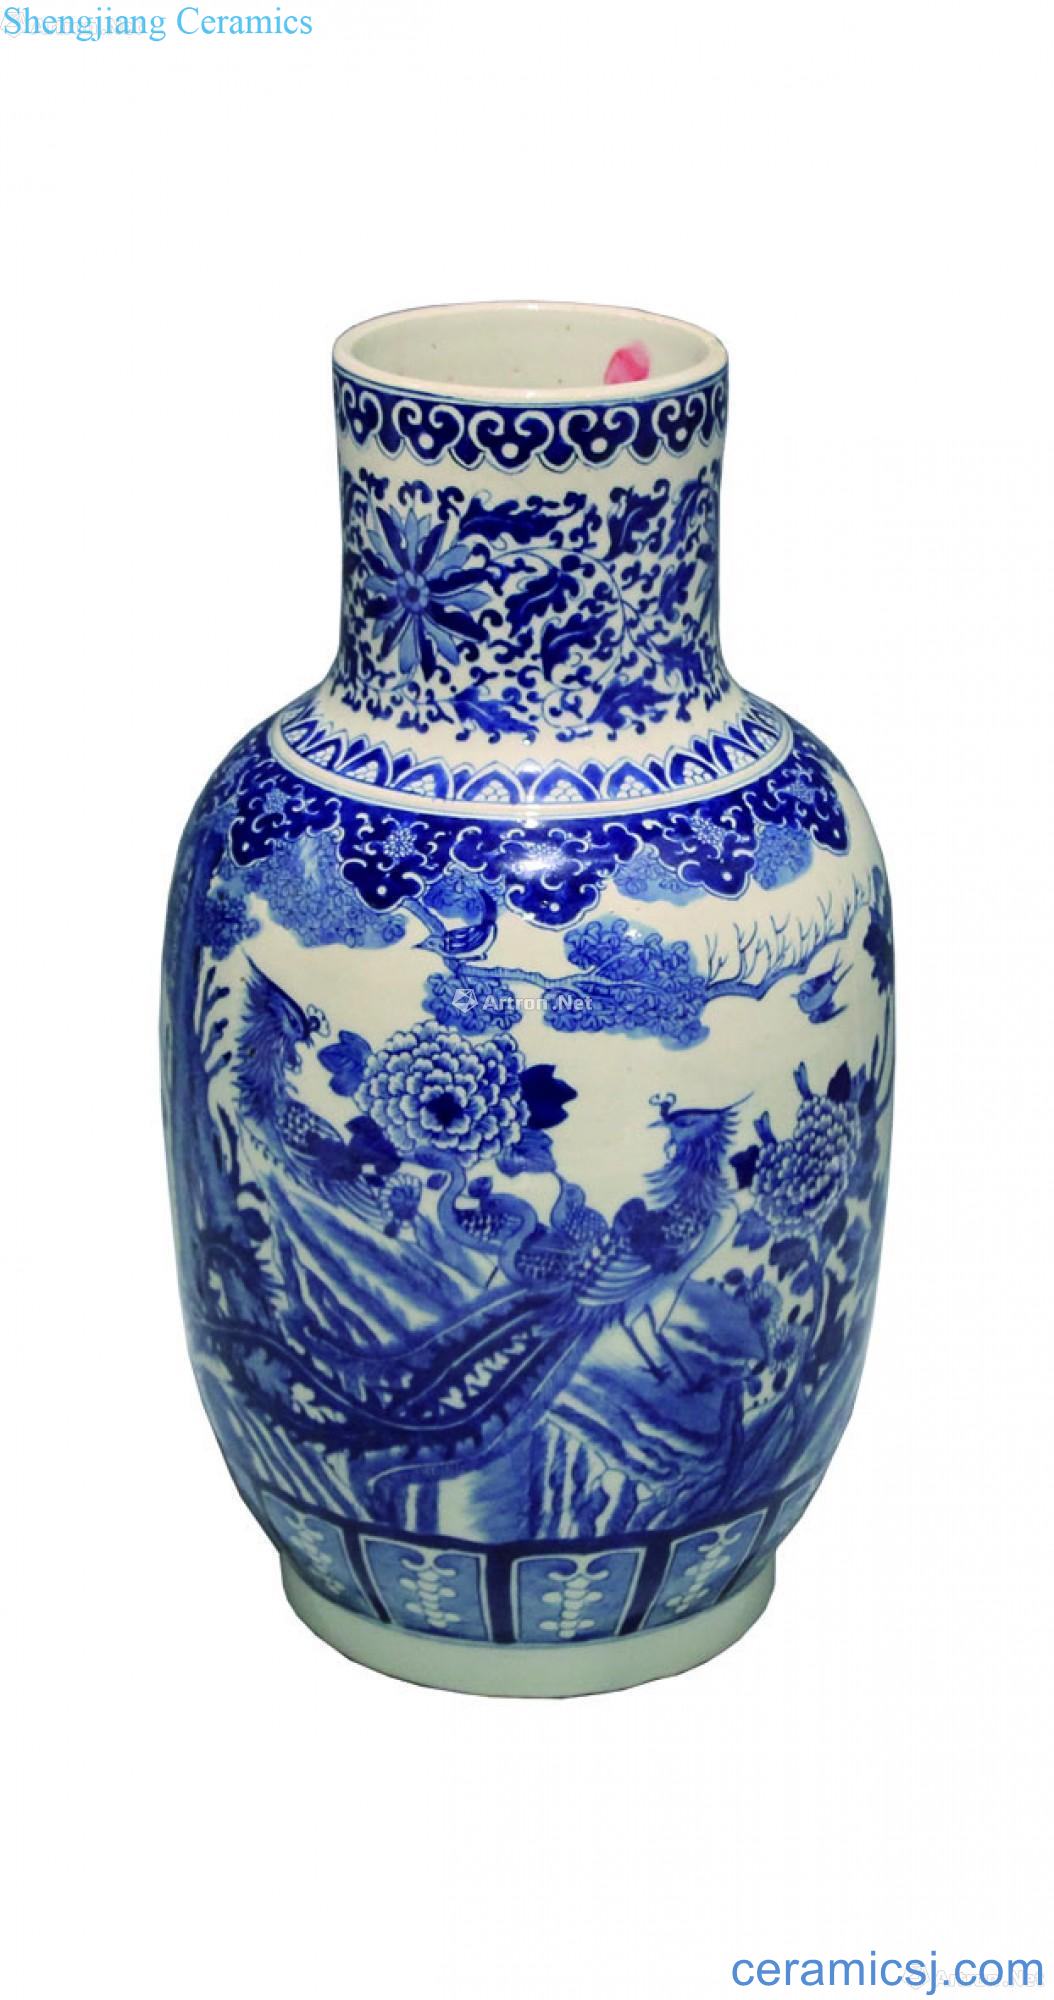 Blue and white wear peony fung lanterns